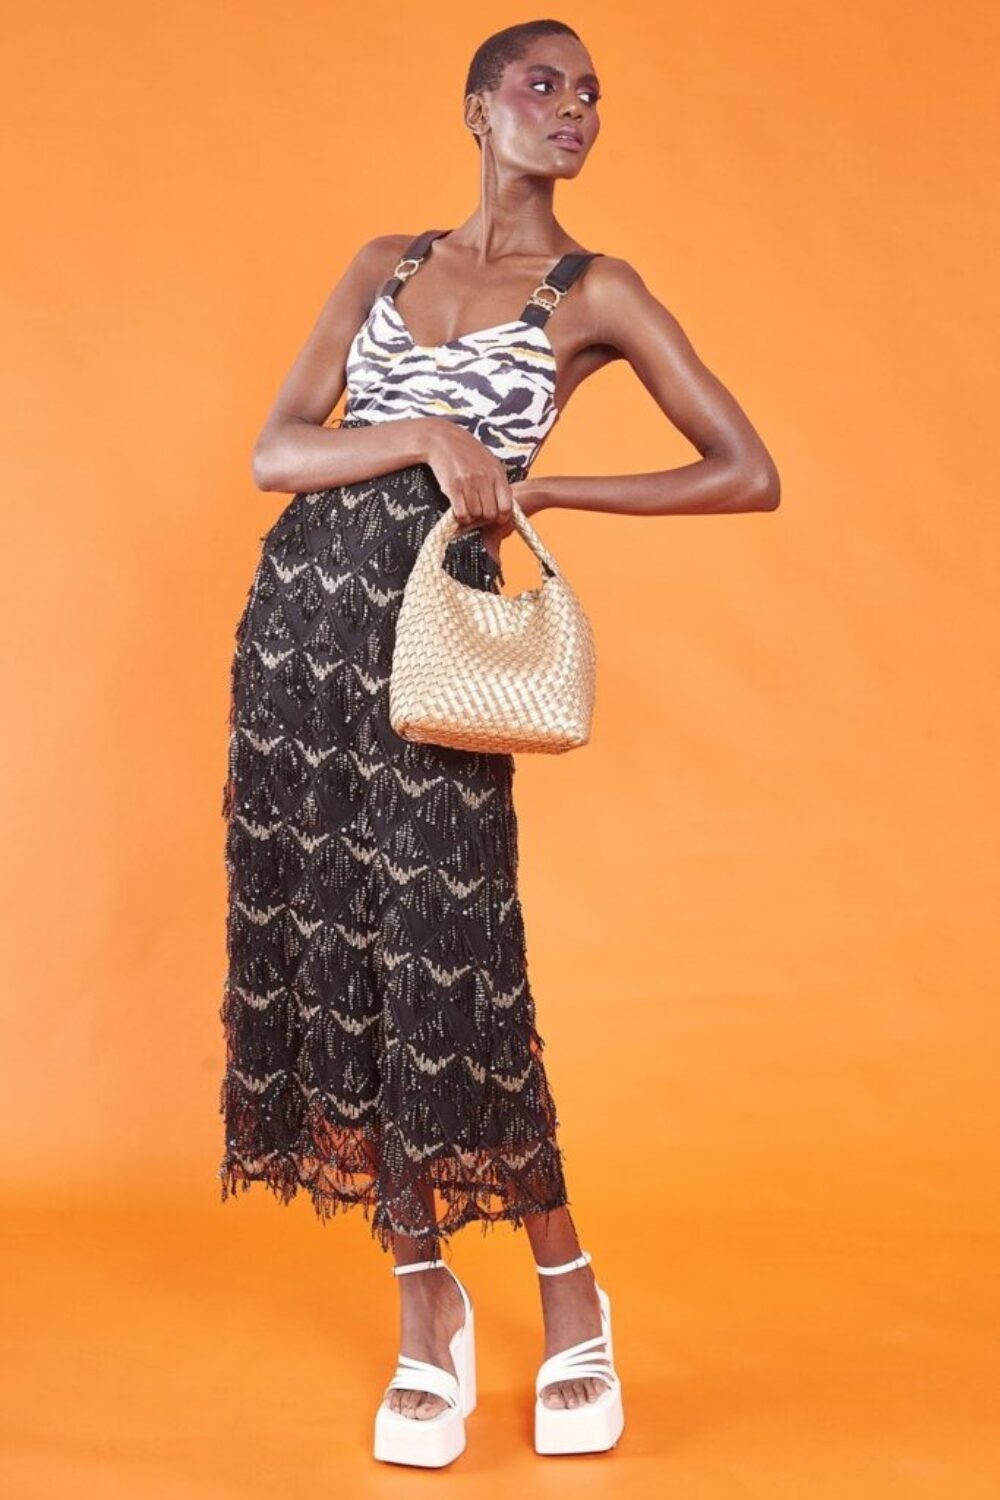 Shop Lux Black Sequin Tassel and Eco Leather Animal Print Maxi Dress and women's luxury and designer clothes at www.lux-apparel.co.uk